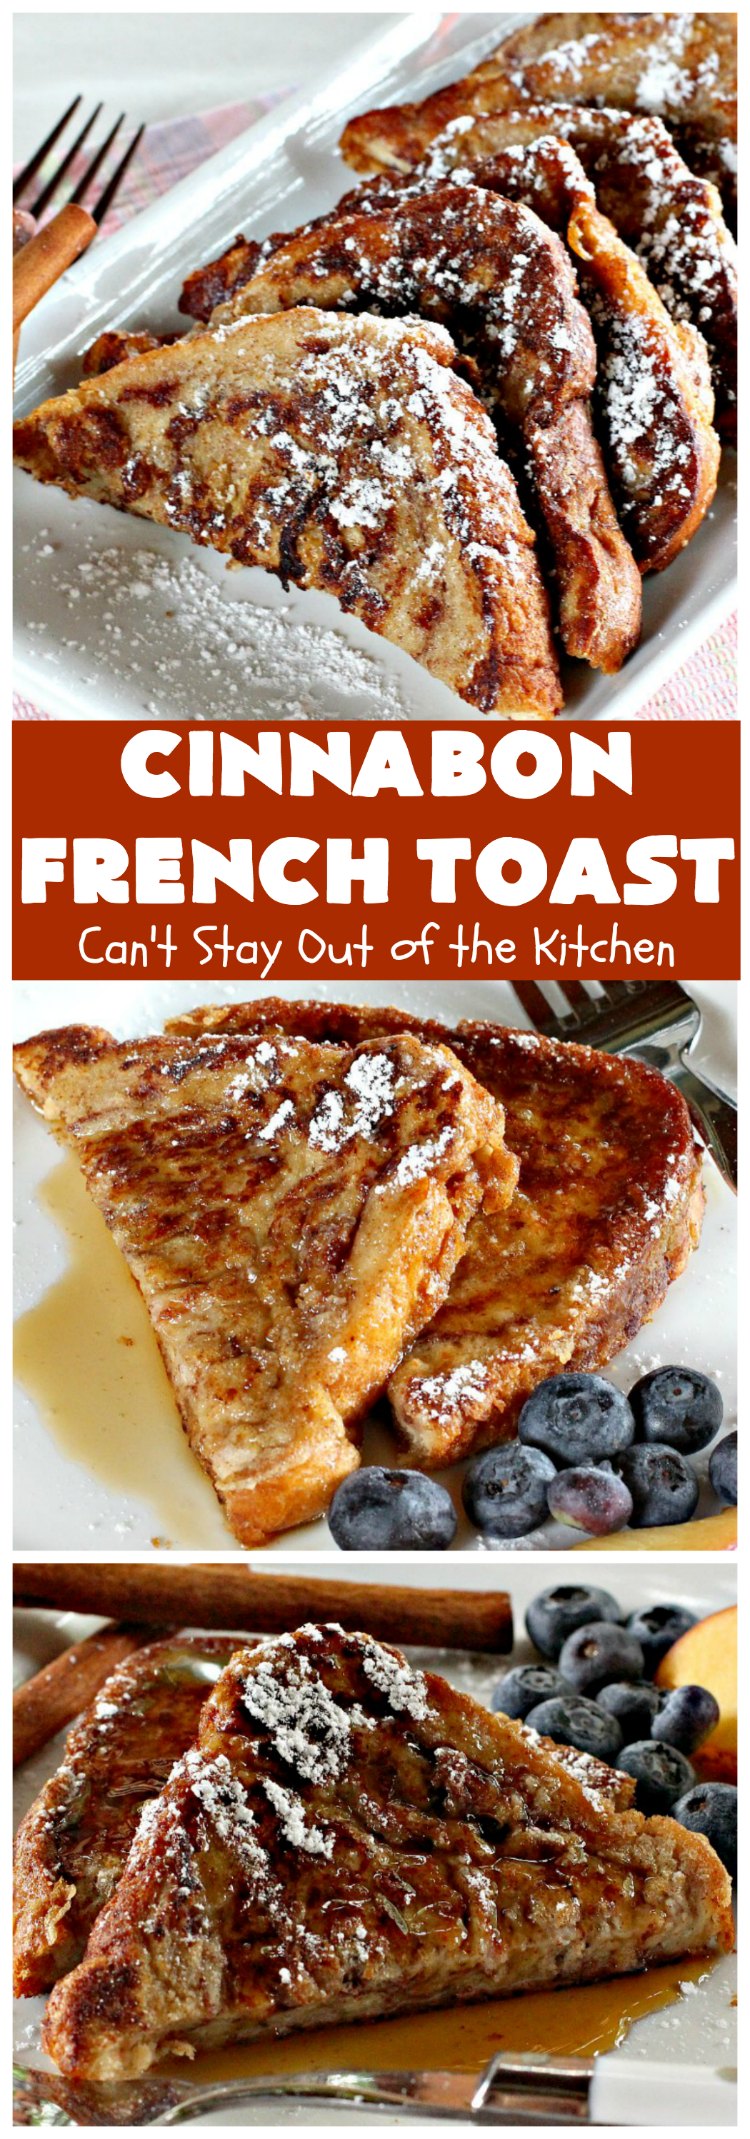 Cinnabon French Toast | Can't Stay Out of the Kitchen